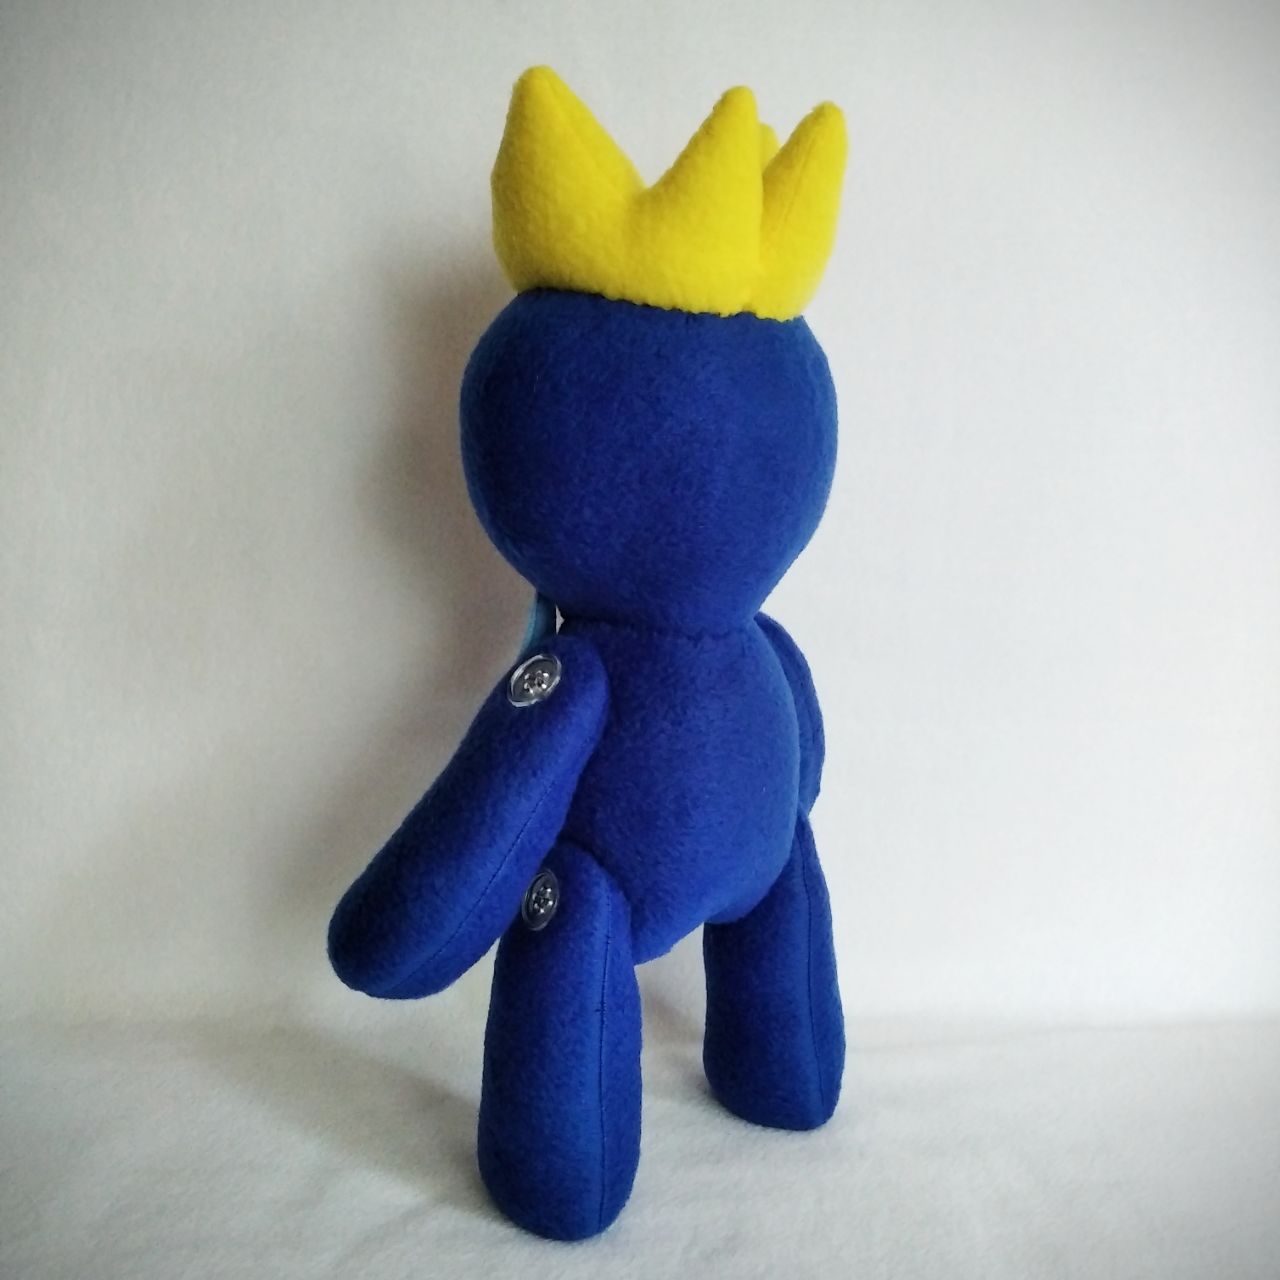 Rainbow Friends Plush Character Blue from Rainbow Friends Toys for